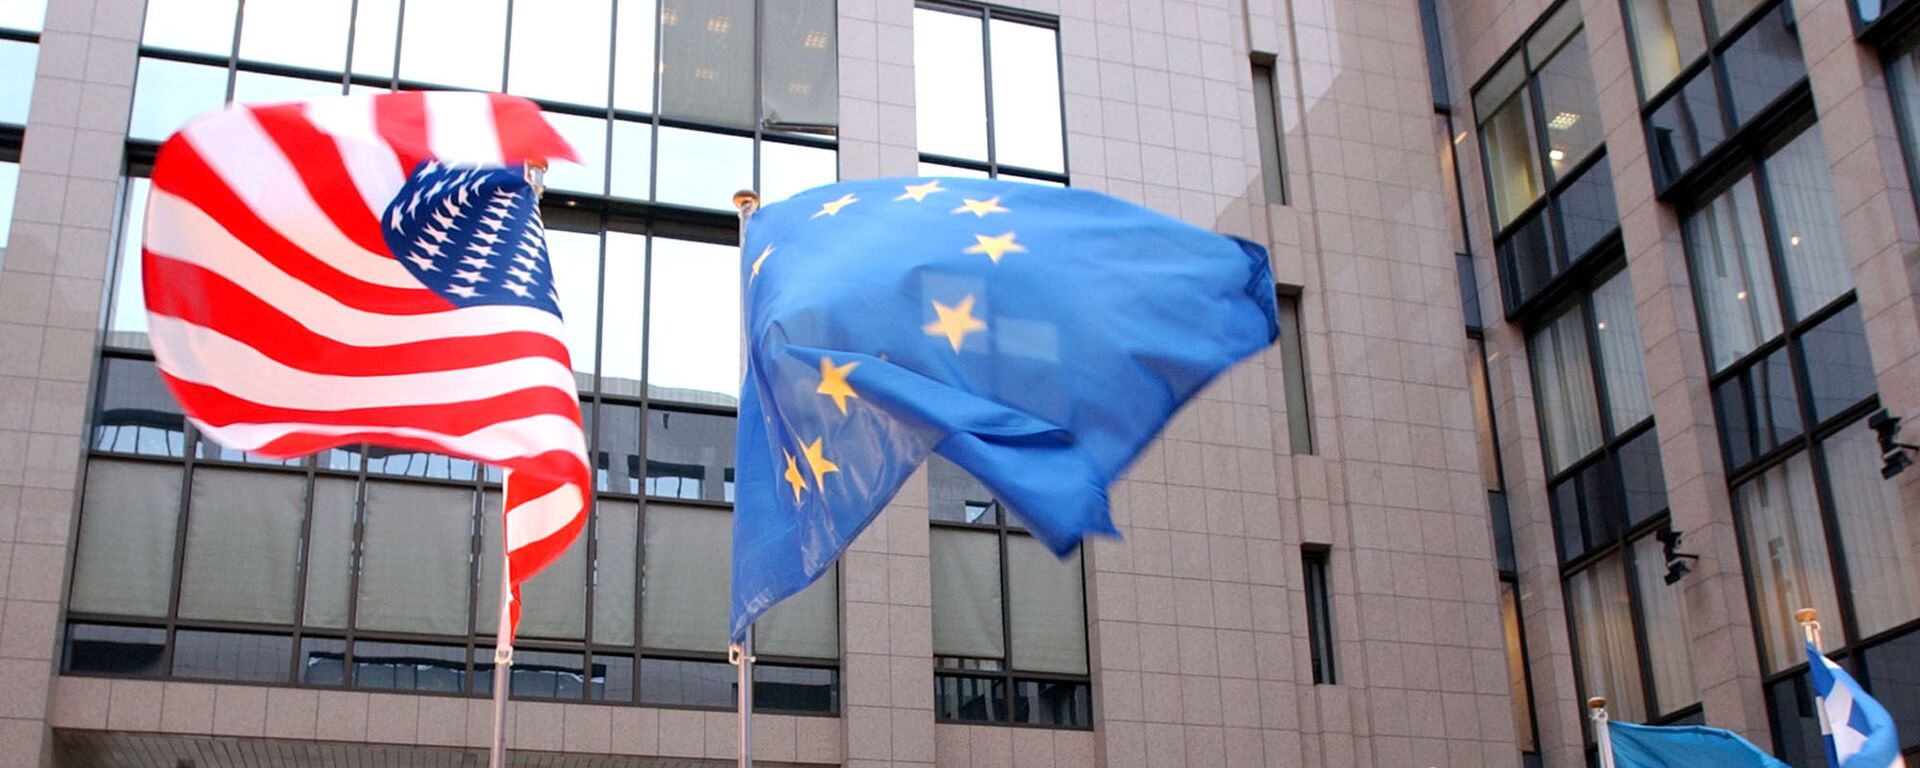 The US and EU flags, top left and right, fly in separate directions at the European Council building in Brussels - Sputnik Moldova, 1920, 24.11.2022